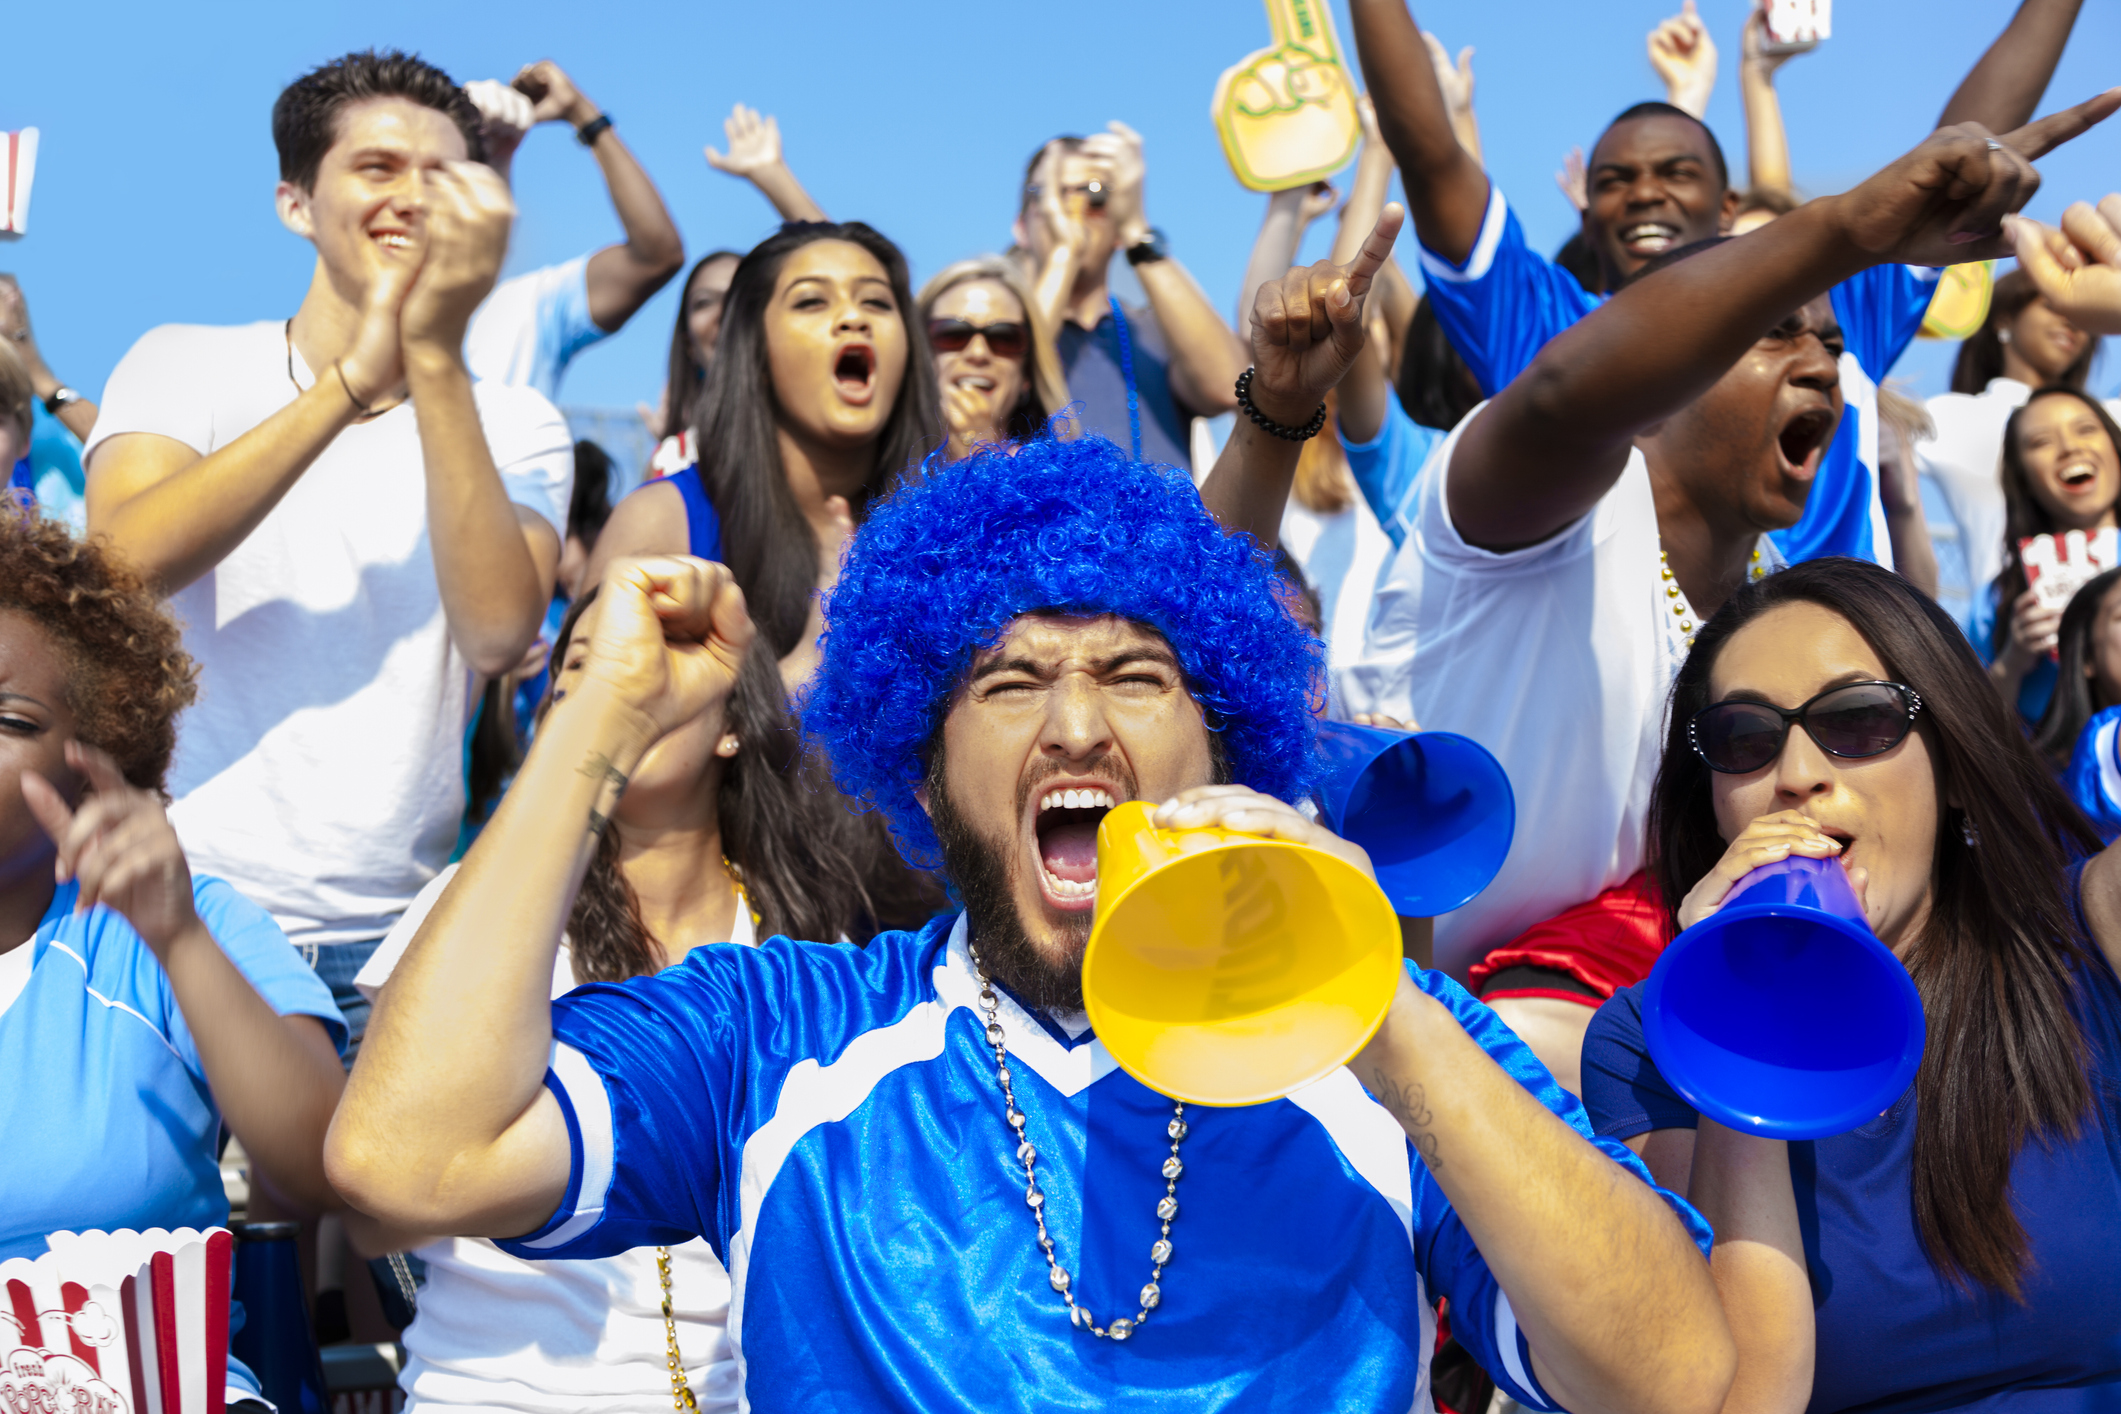 Multi-ethnic group of fans scream and yell for their team to win during a local sports event.